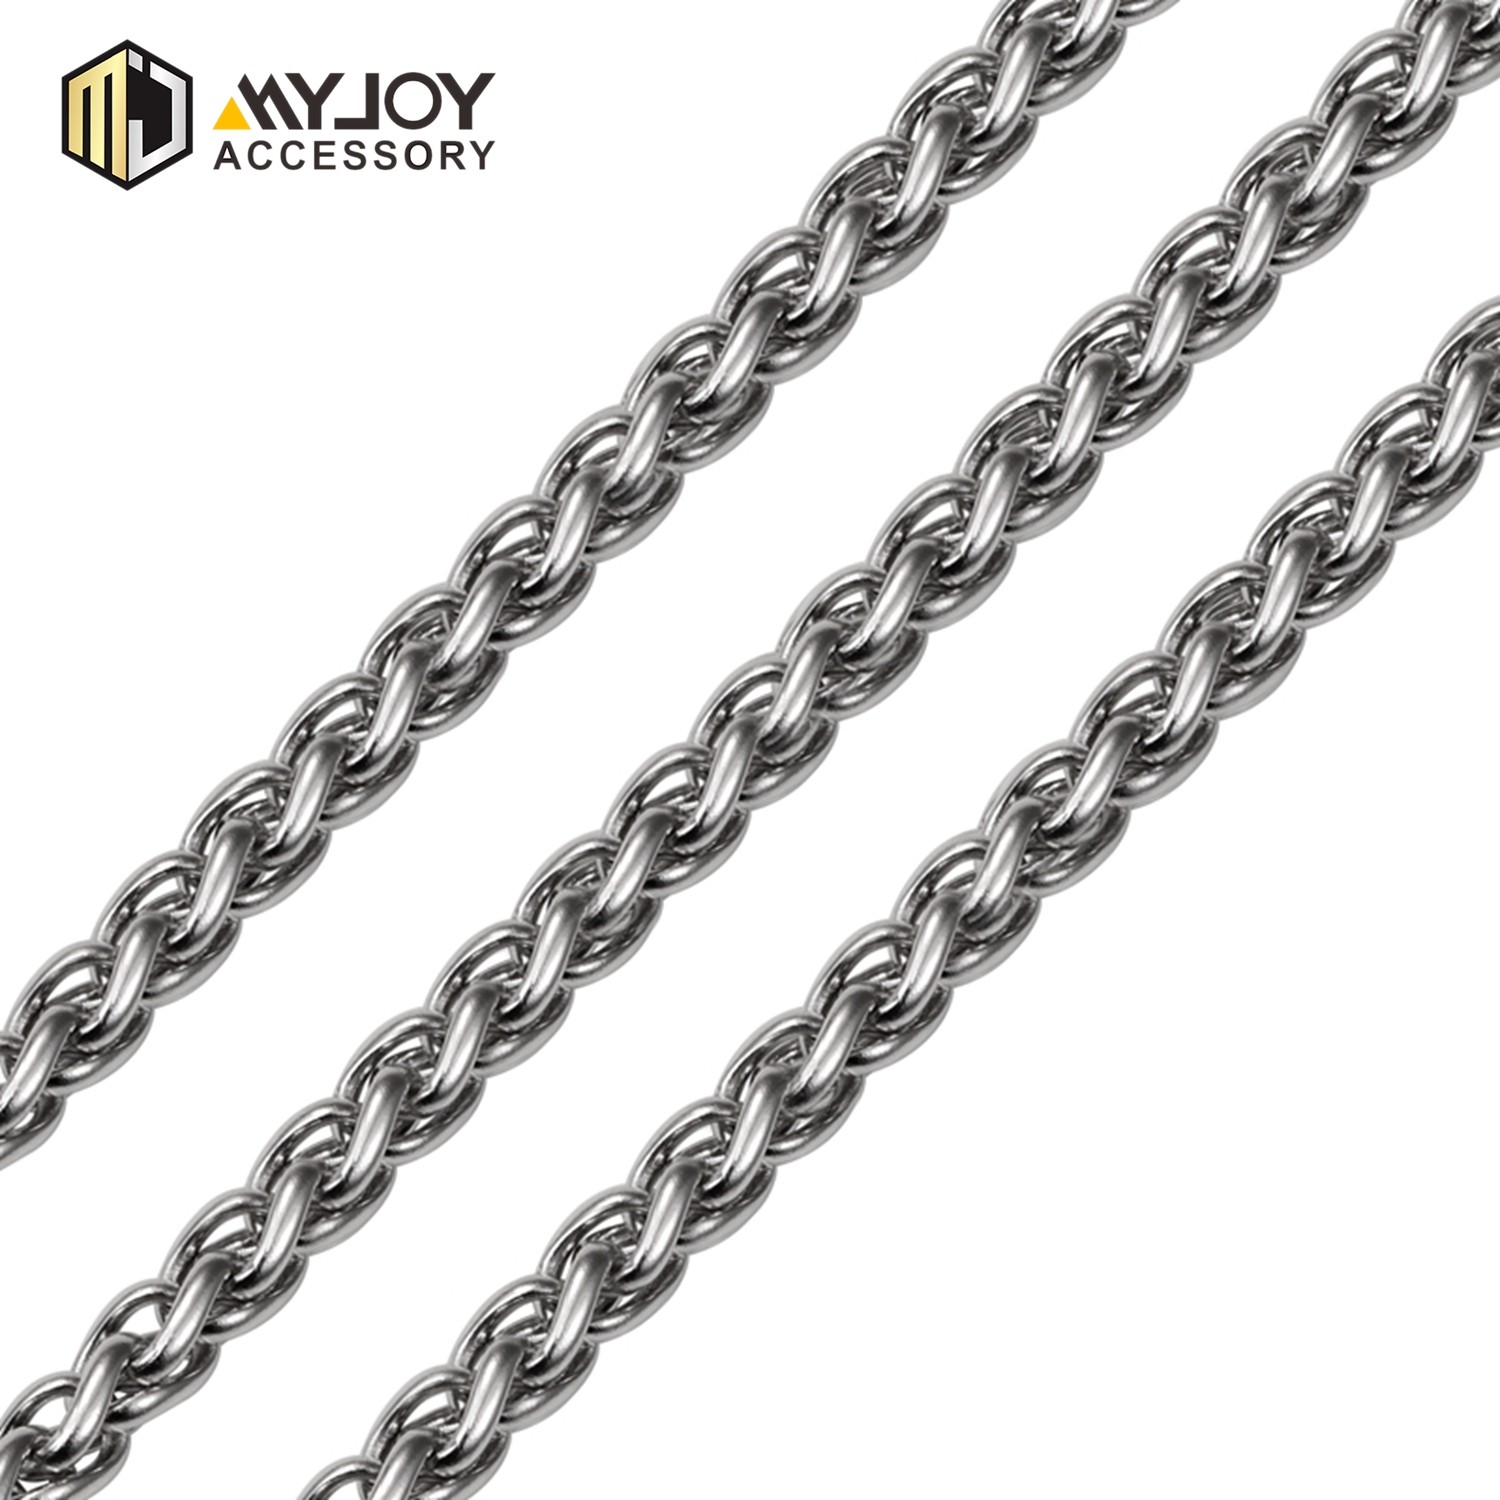 MYJOY Top bag chain for business for bags-3